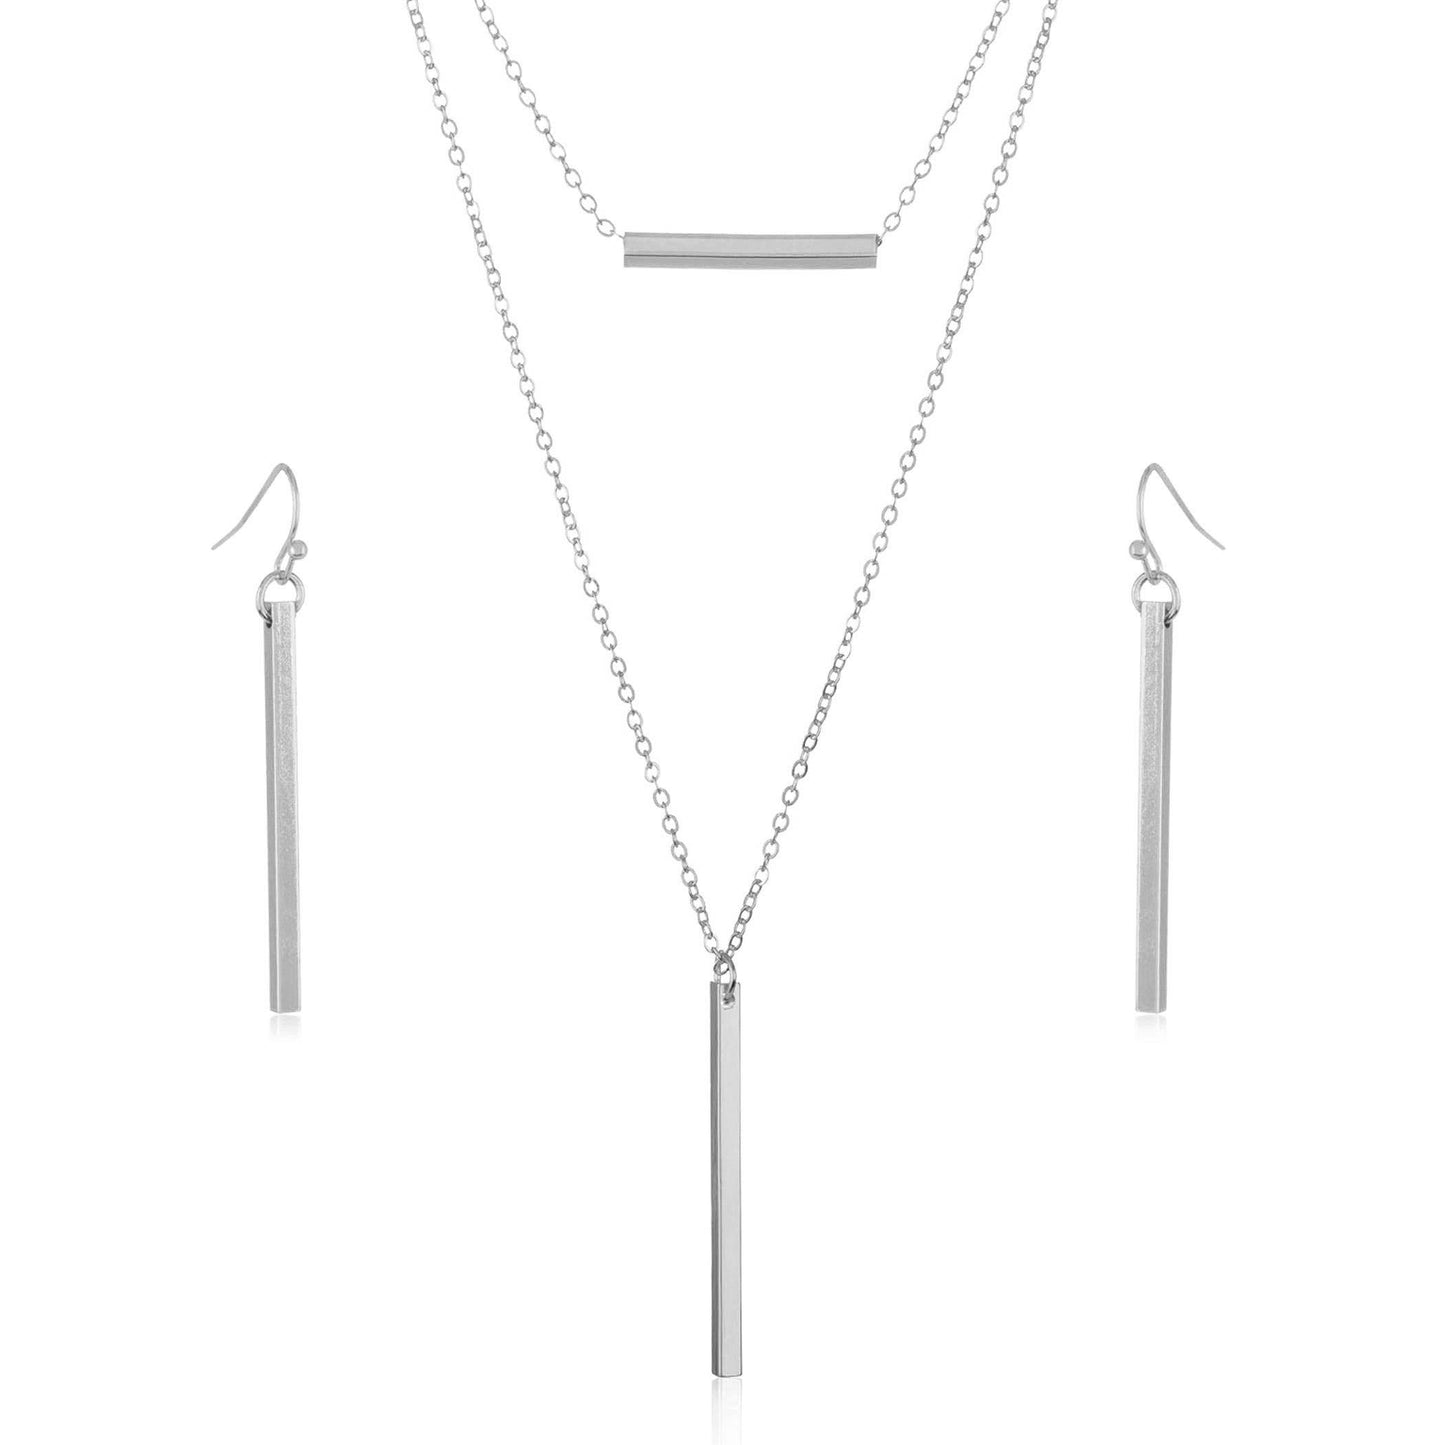 Double Layer Bar Necklace and Earring Jewelry Set